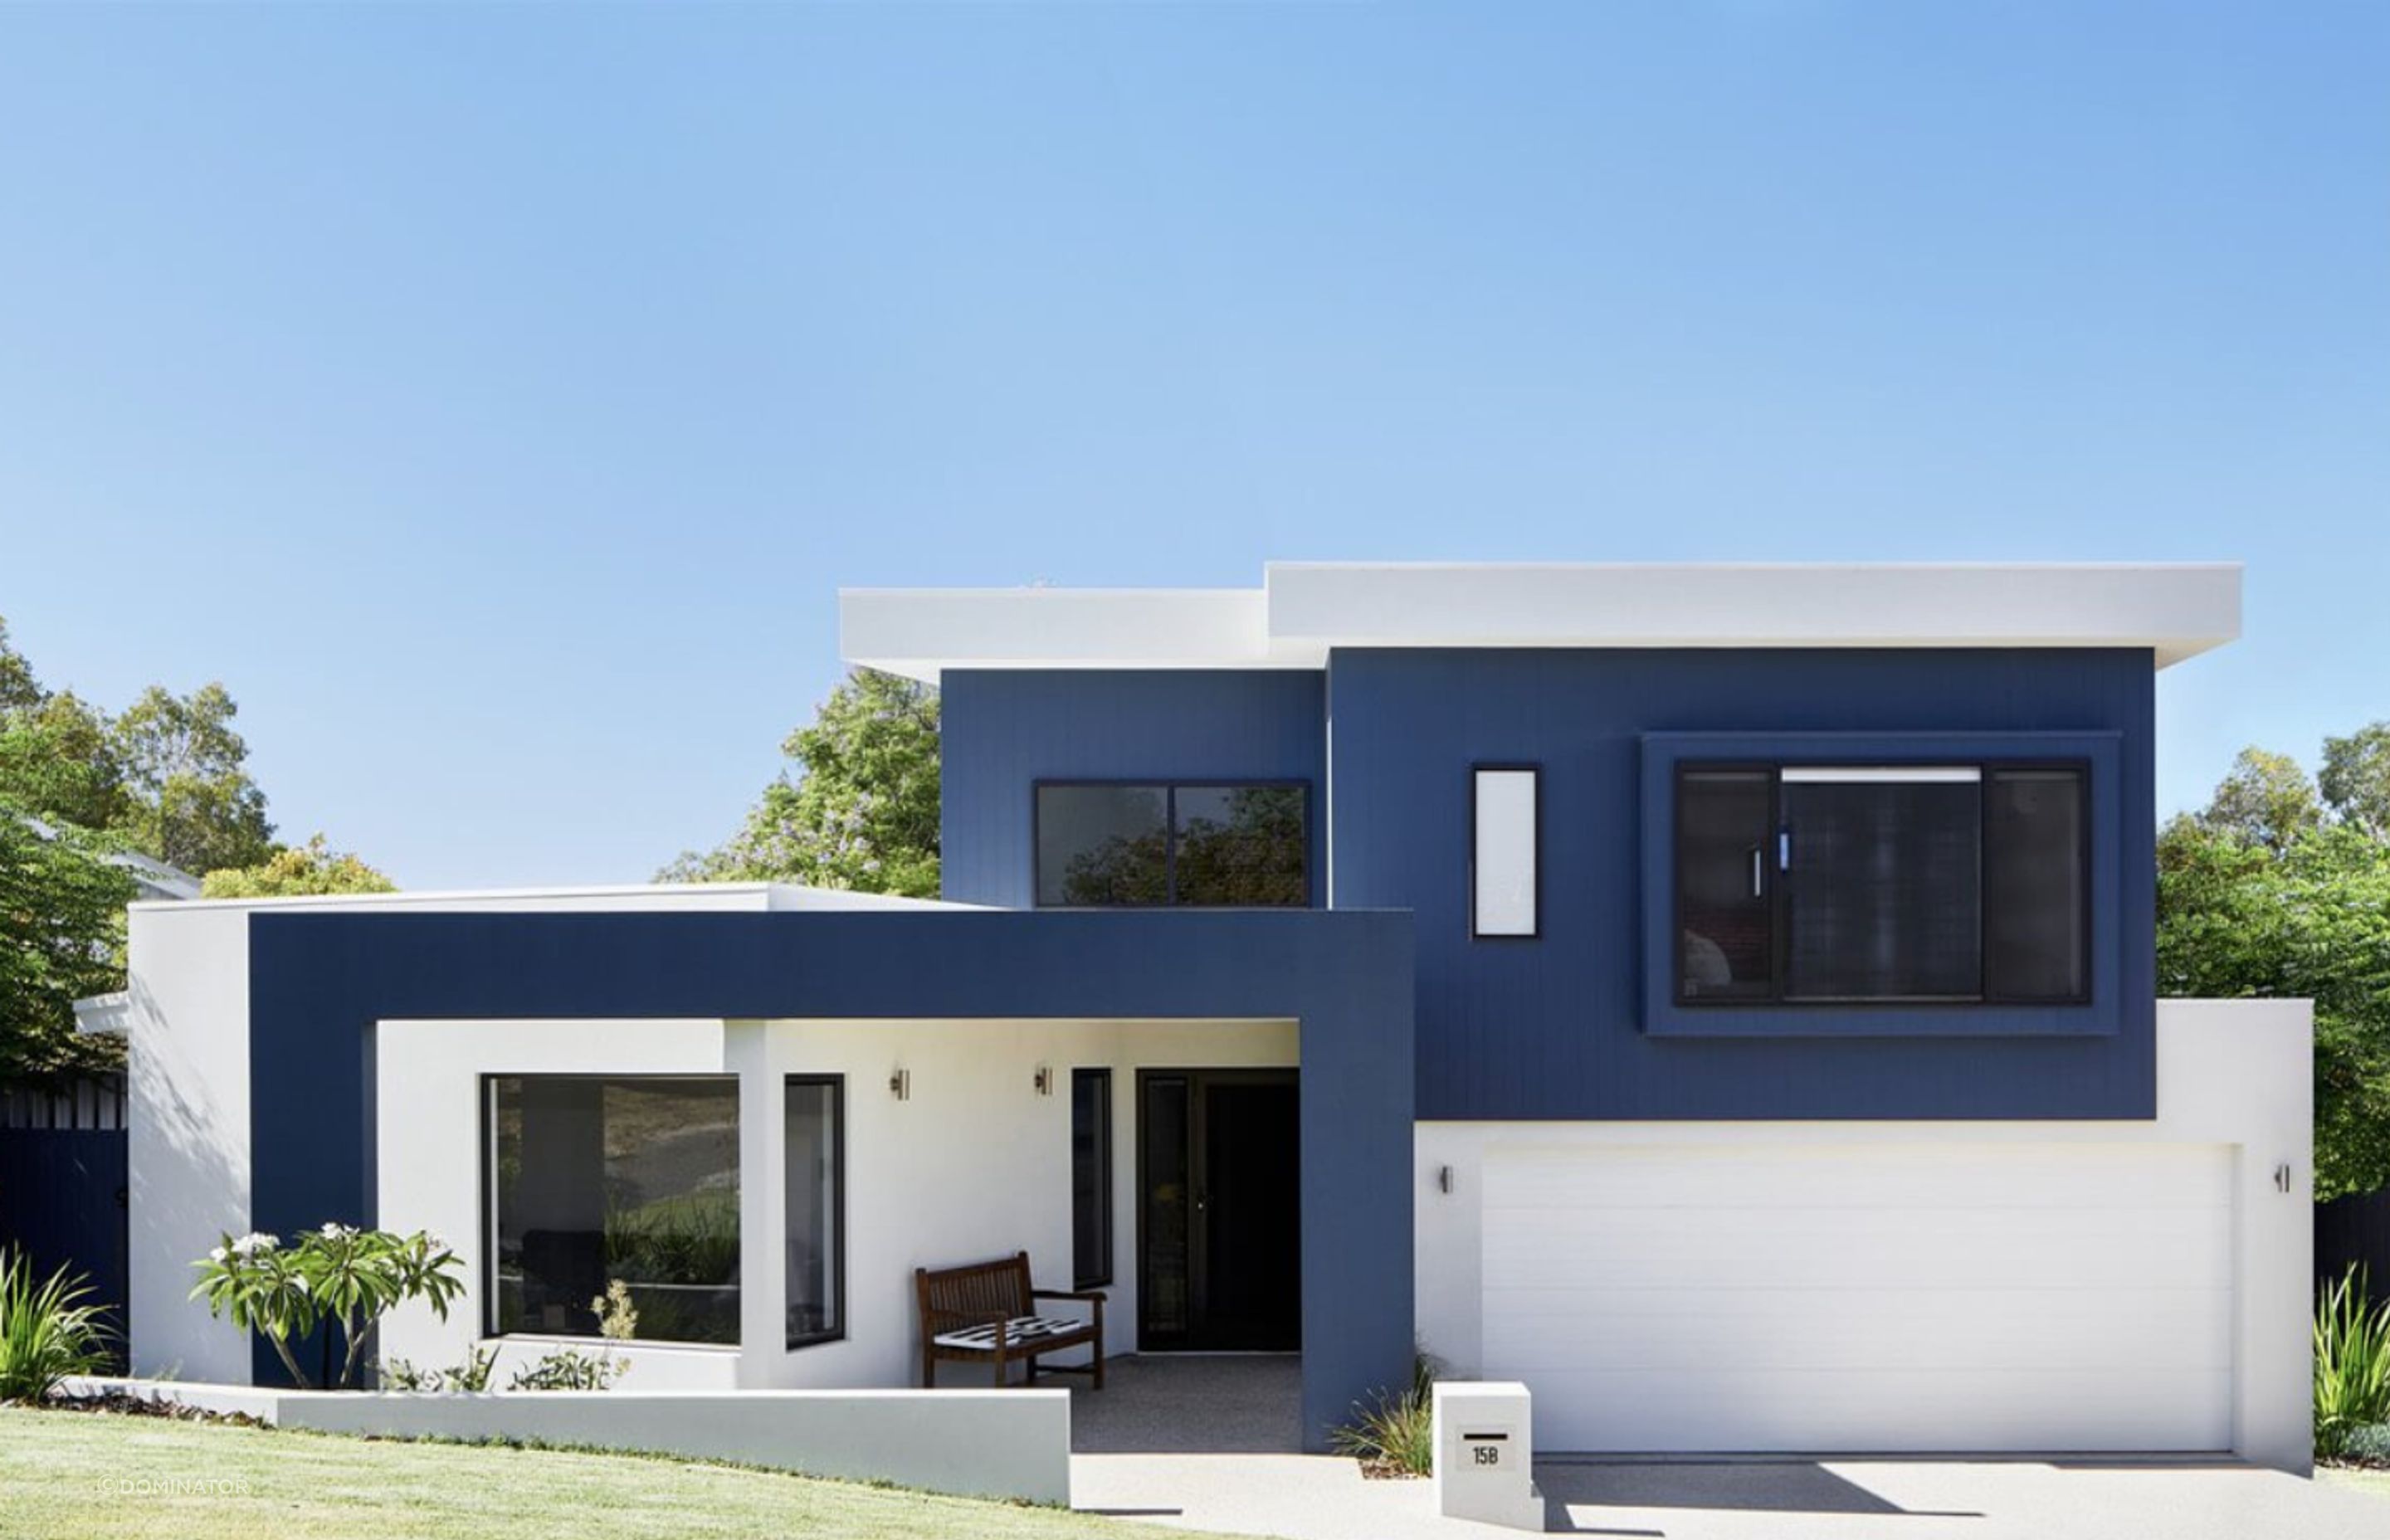 Dominator's pre-painted steel is made for New Zealand conditions using COLORSTEEL. Two-tone colour blocking can complement your exterior palette.